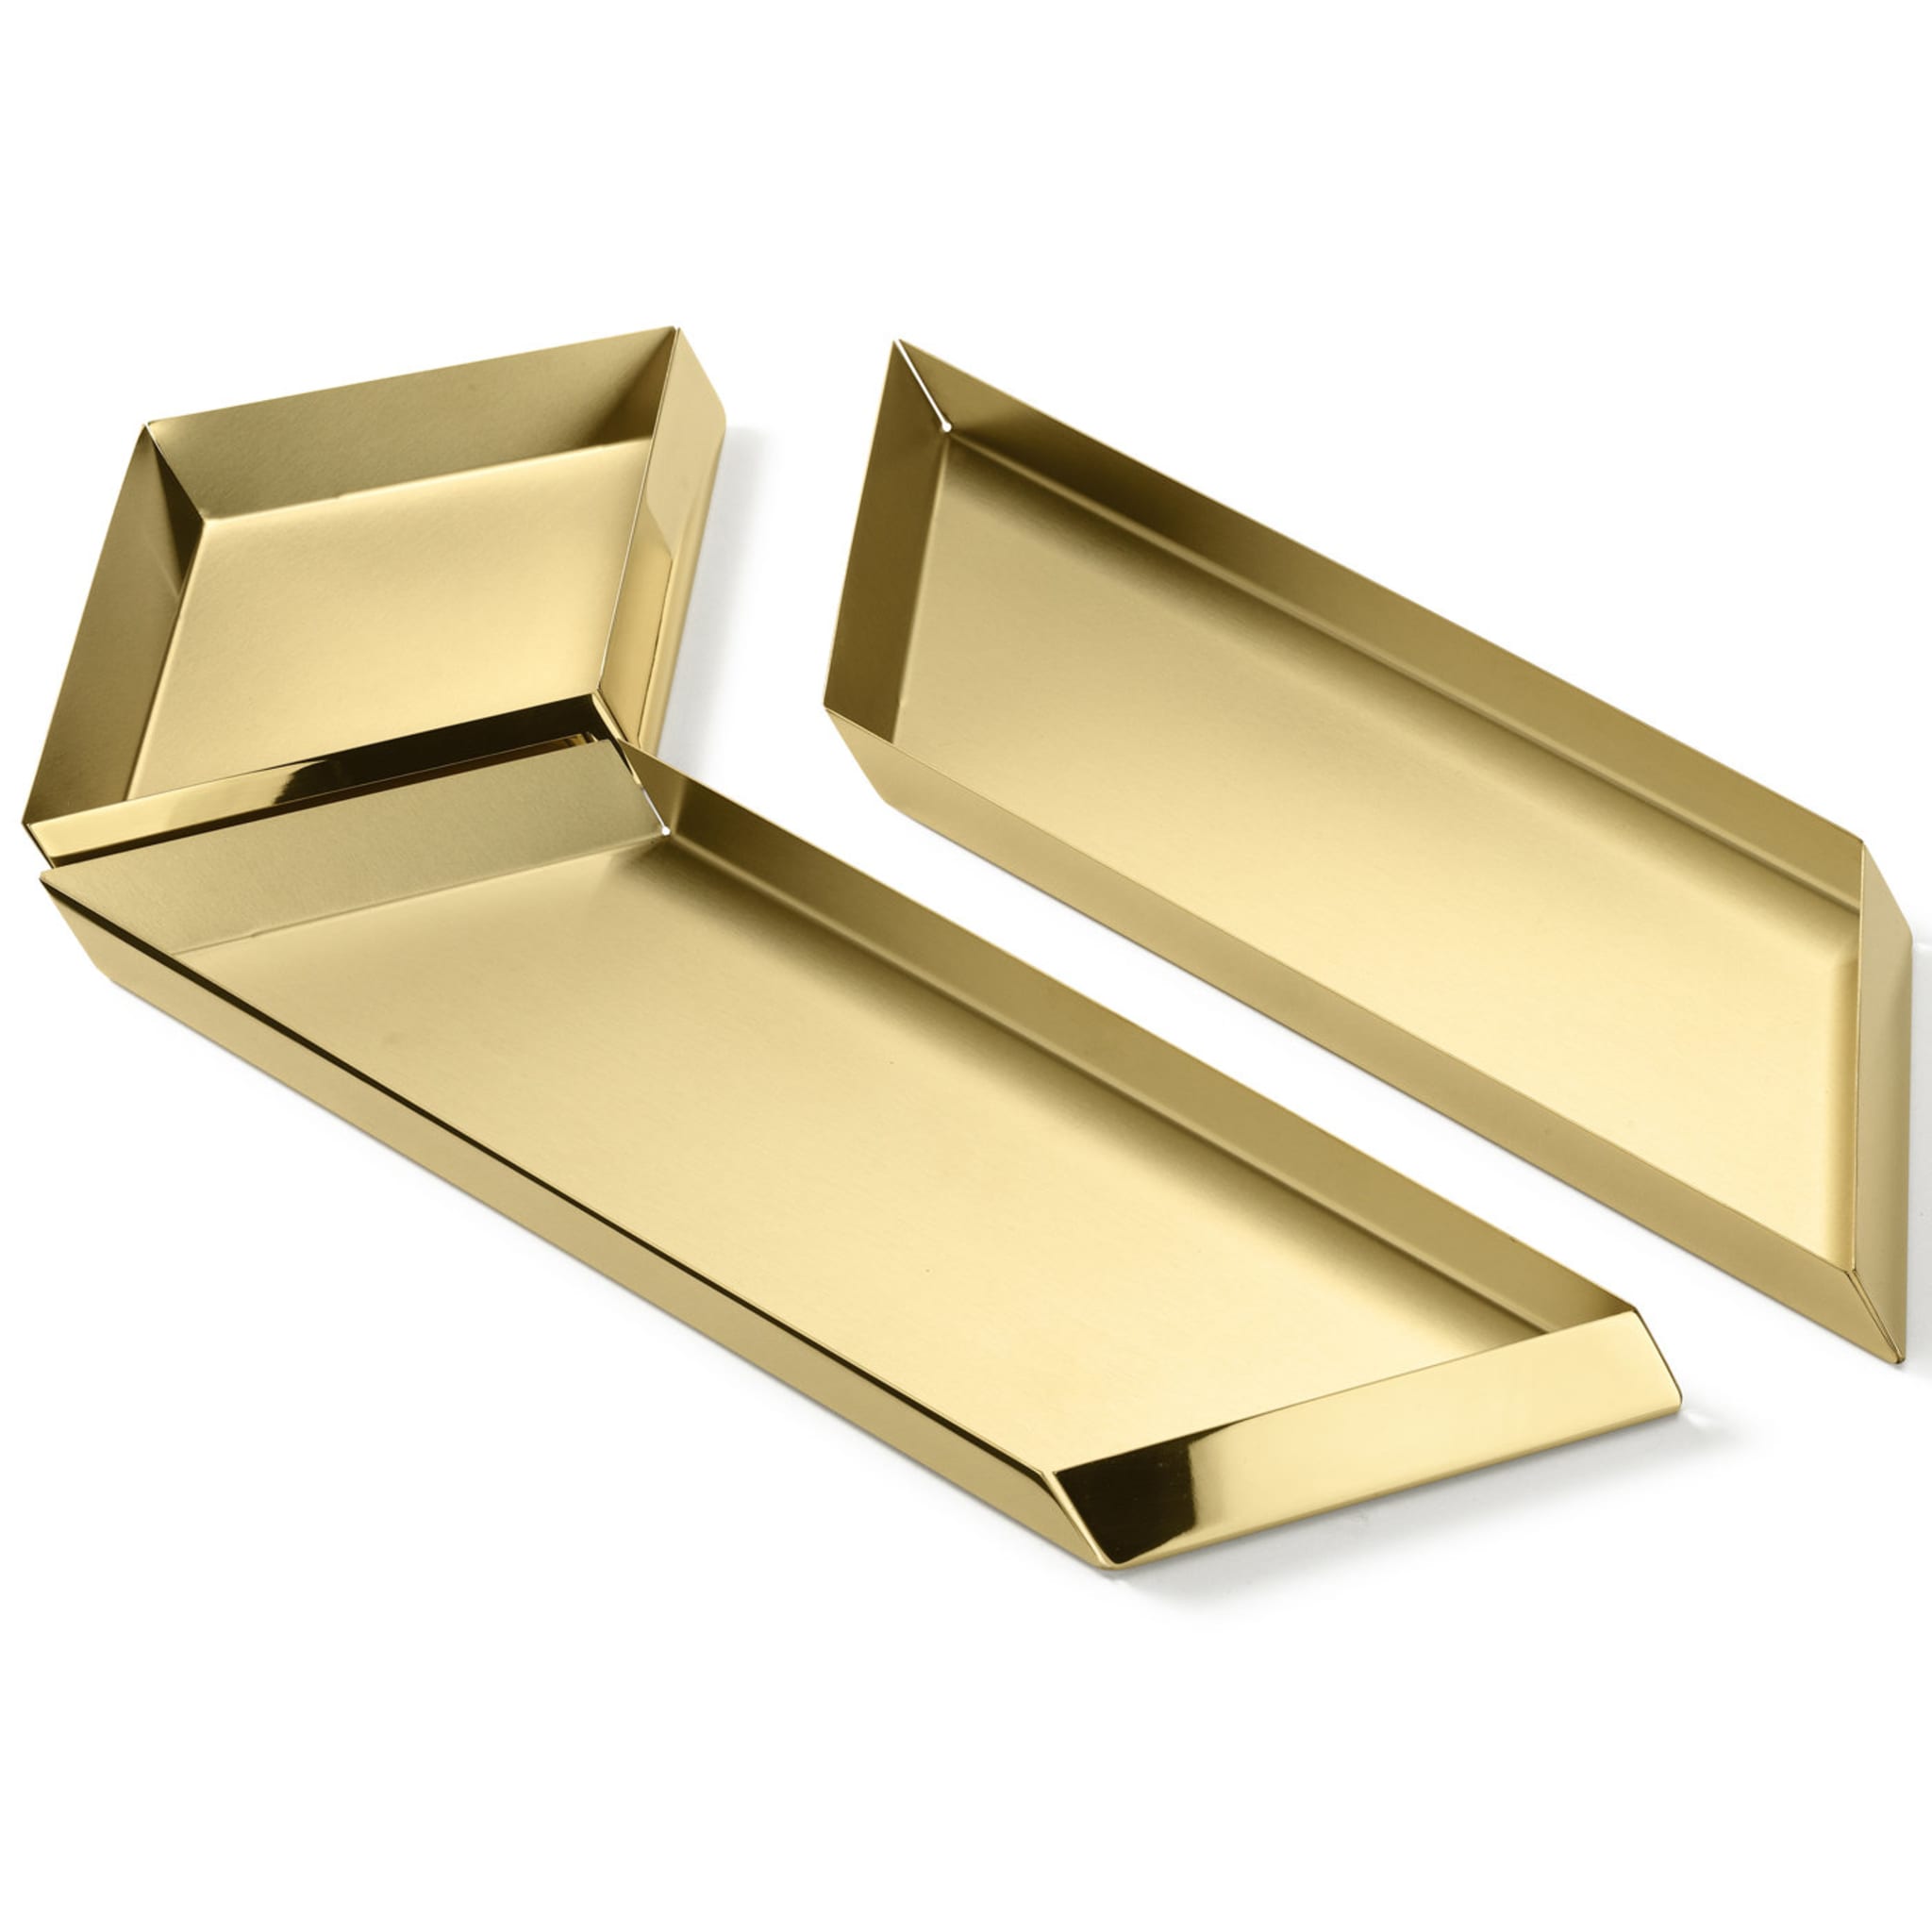 Axonometry Polished Brass Large Parallelepiped Tray By Elisa Giovannoni - Alternative view 1